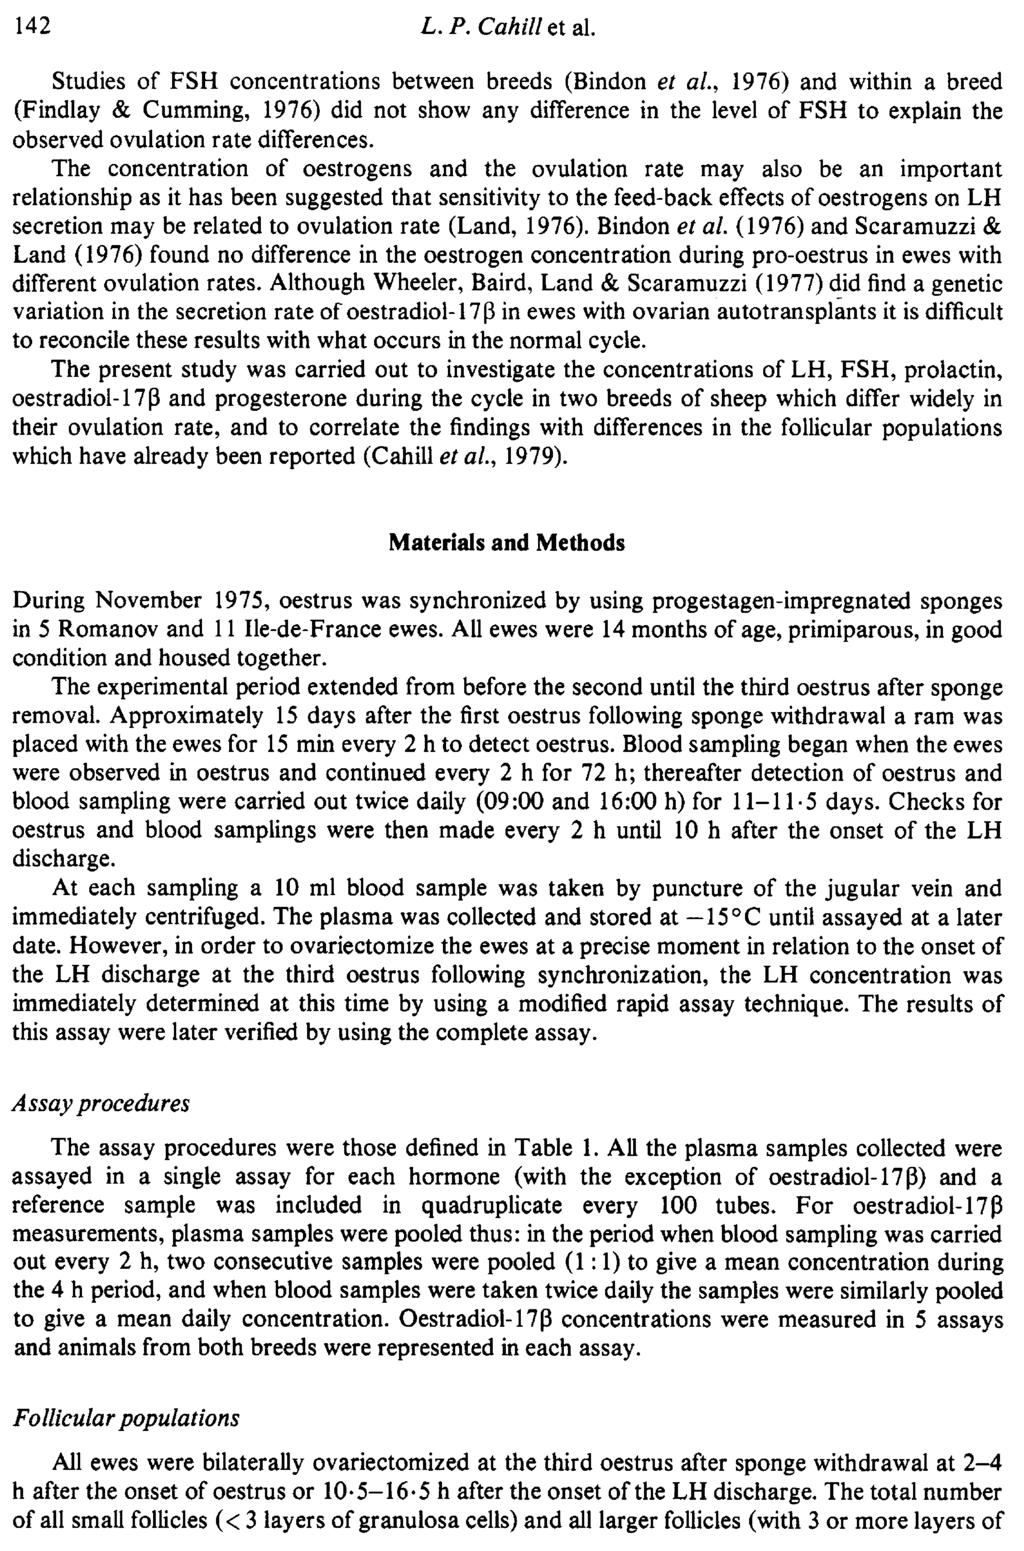 Studies of FSH concentrations between breeds (Bindon et al, 1976) and within a breed (Findlay & Cumming, 1976) did not show any difference in the level of FSH to explain the observed ovulation rate